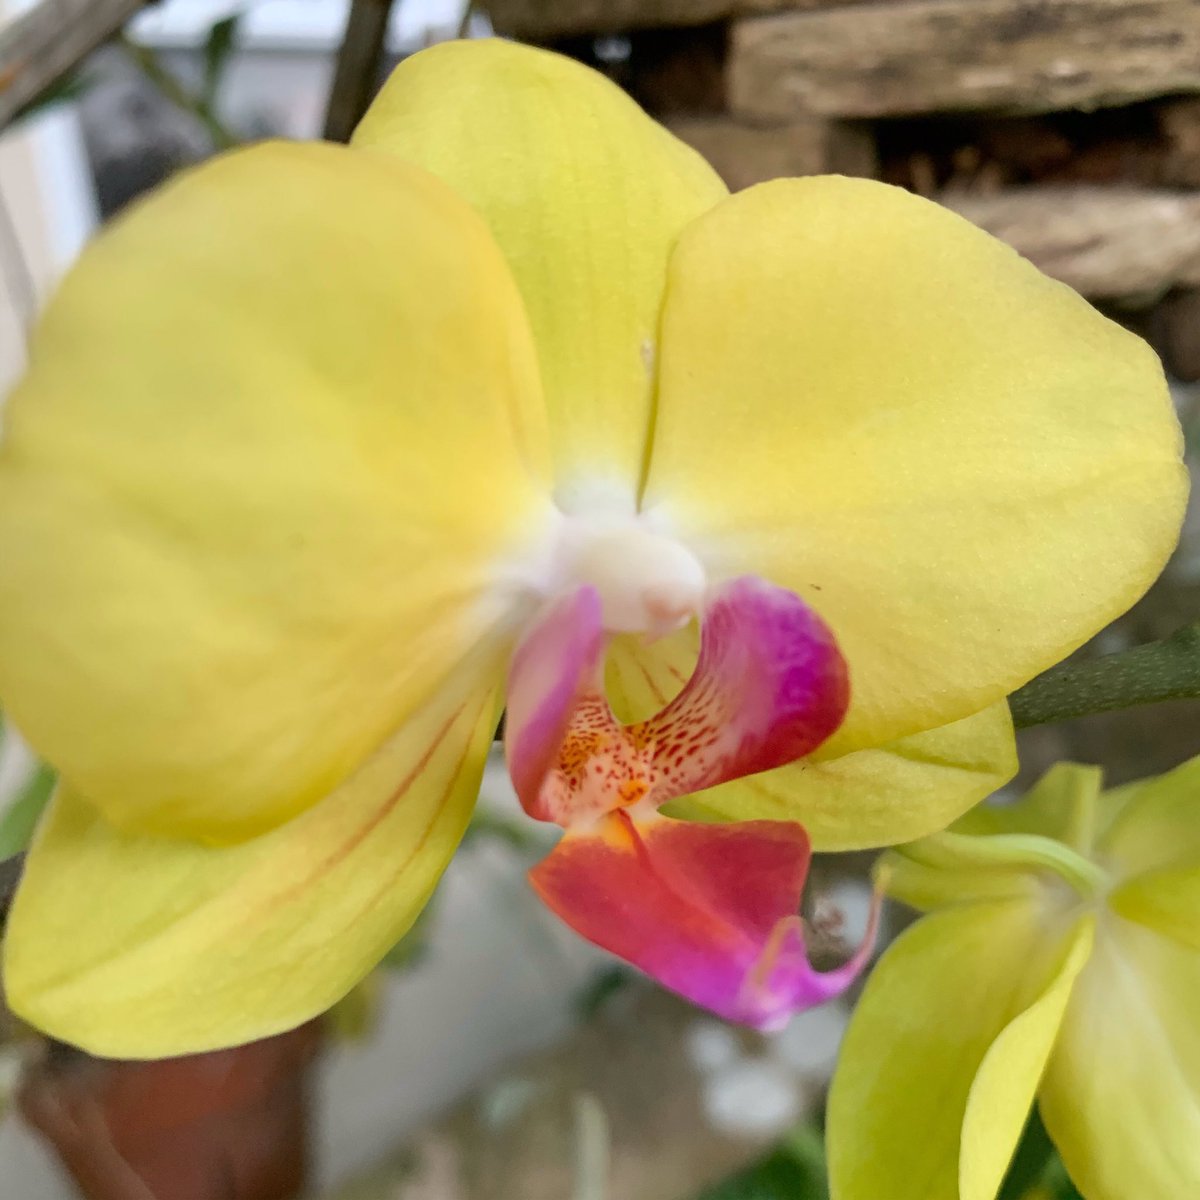 Loving this yellow...was a standout amongst the green in the yard. #orchid #orchidphalaenopsis #airplants #hangingplants #gardening